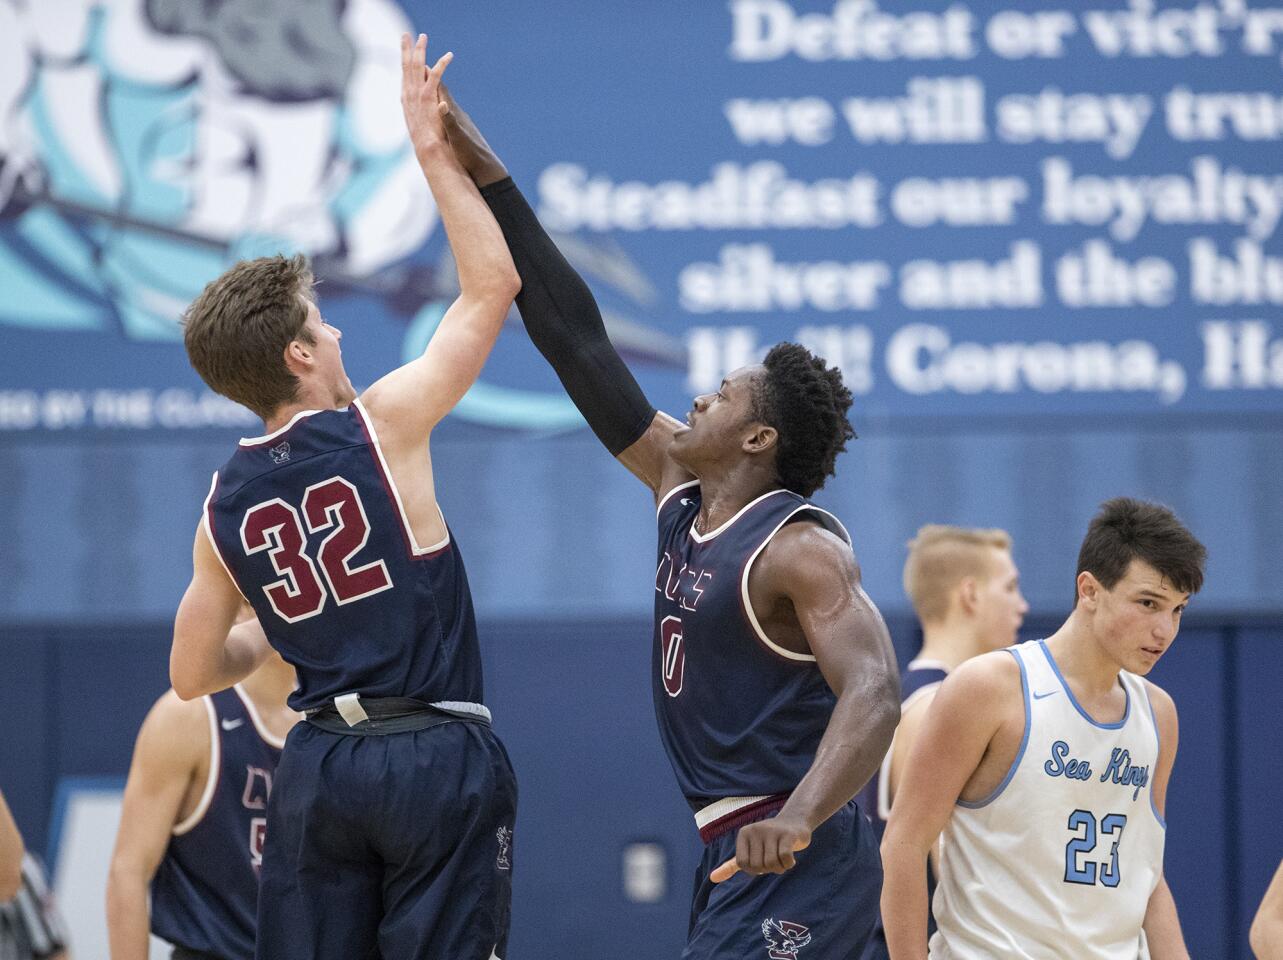 Capistrano Valley Christian's Luke Powell, left, and Festus Ndumanya high-five as Corona del Mar's Jack Stone walks off the court during a Coach Mike's Long Shot Challenge game on Monday.